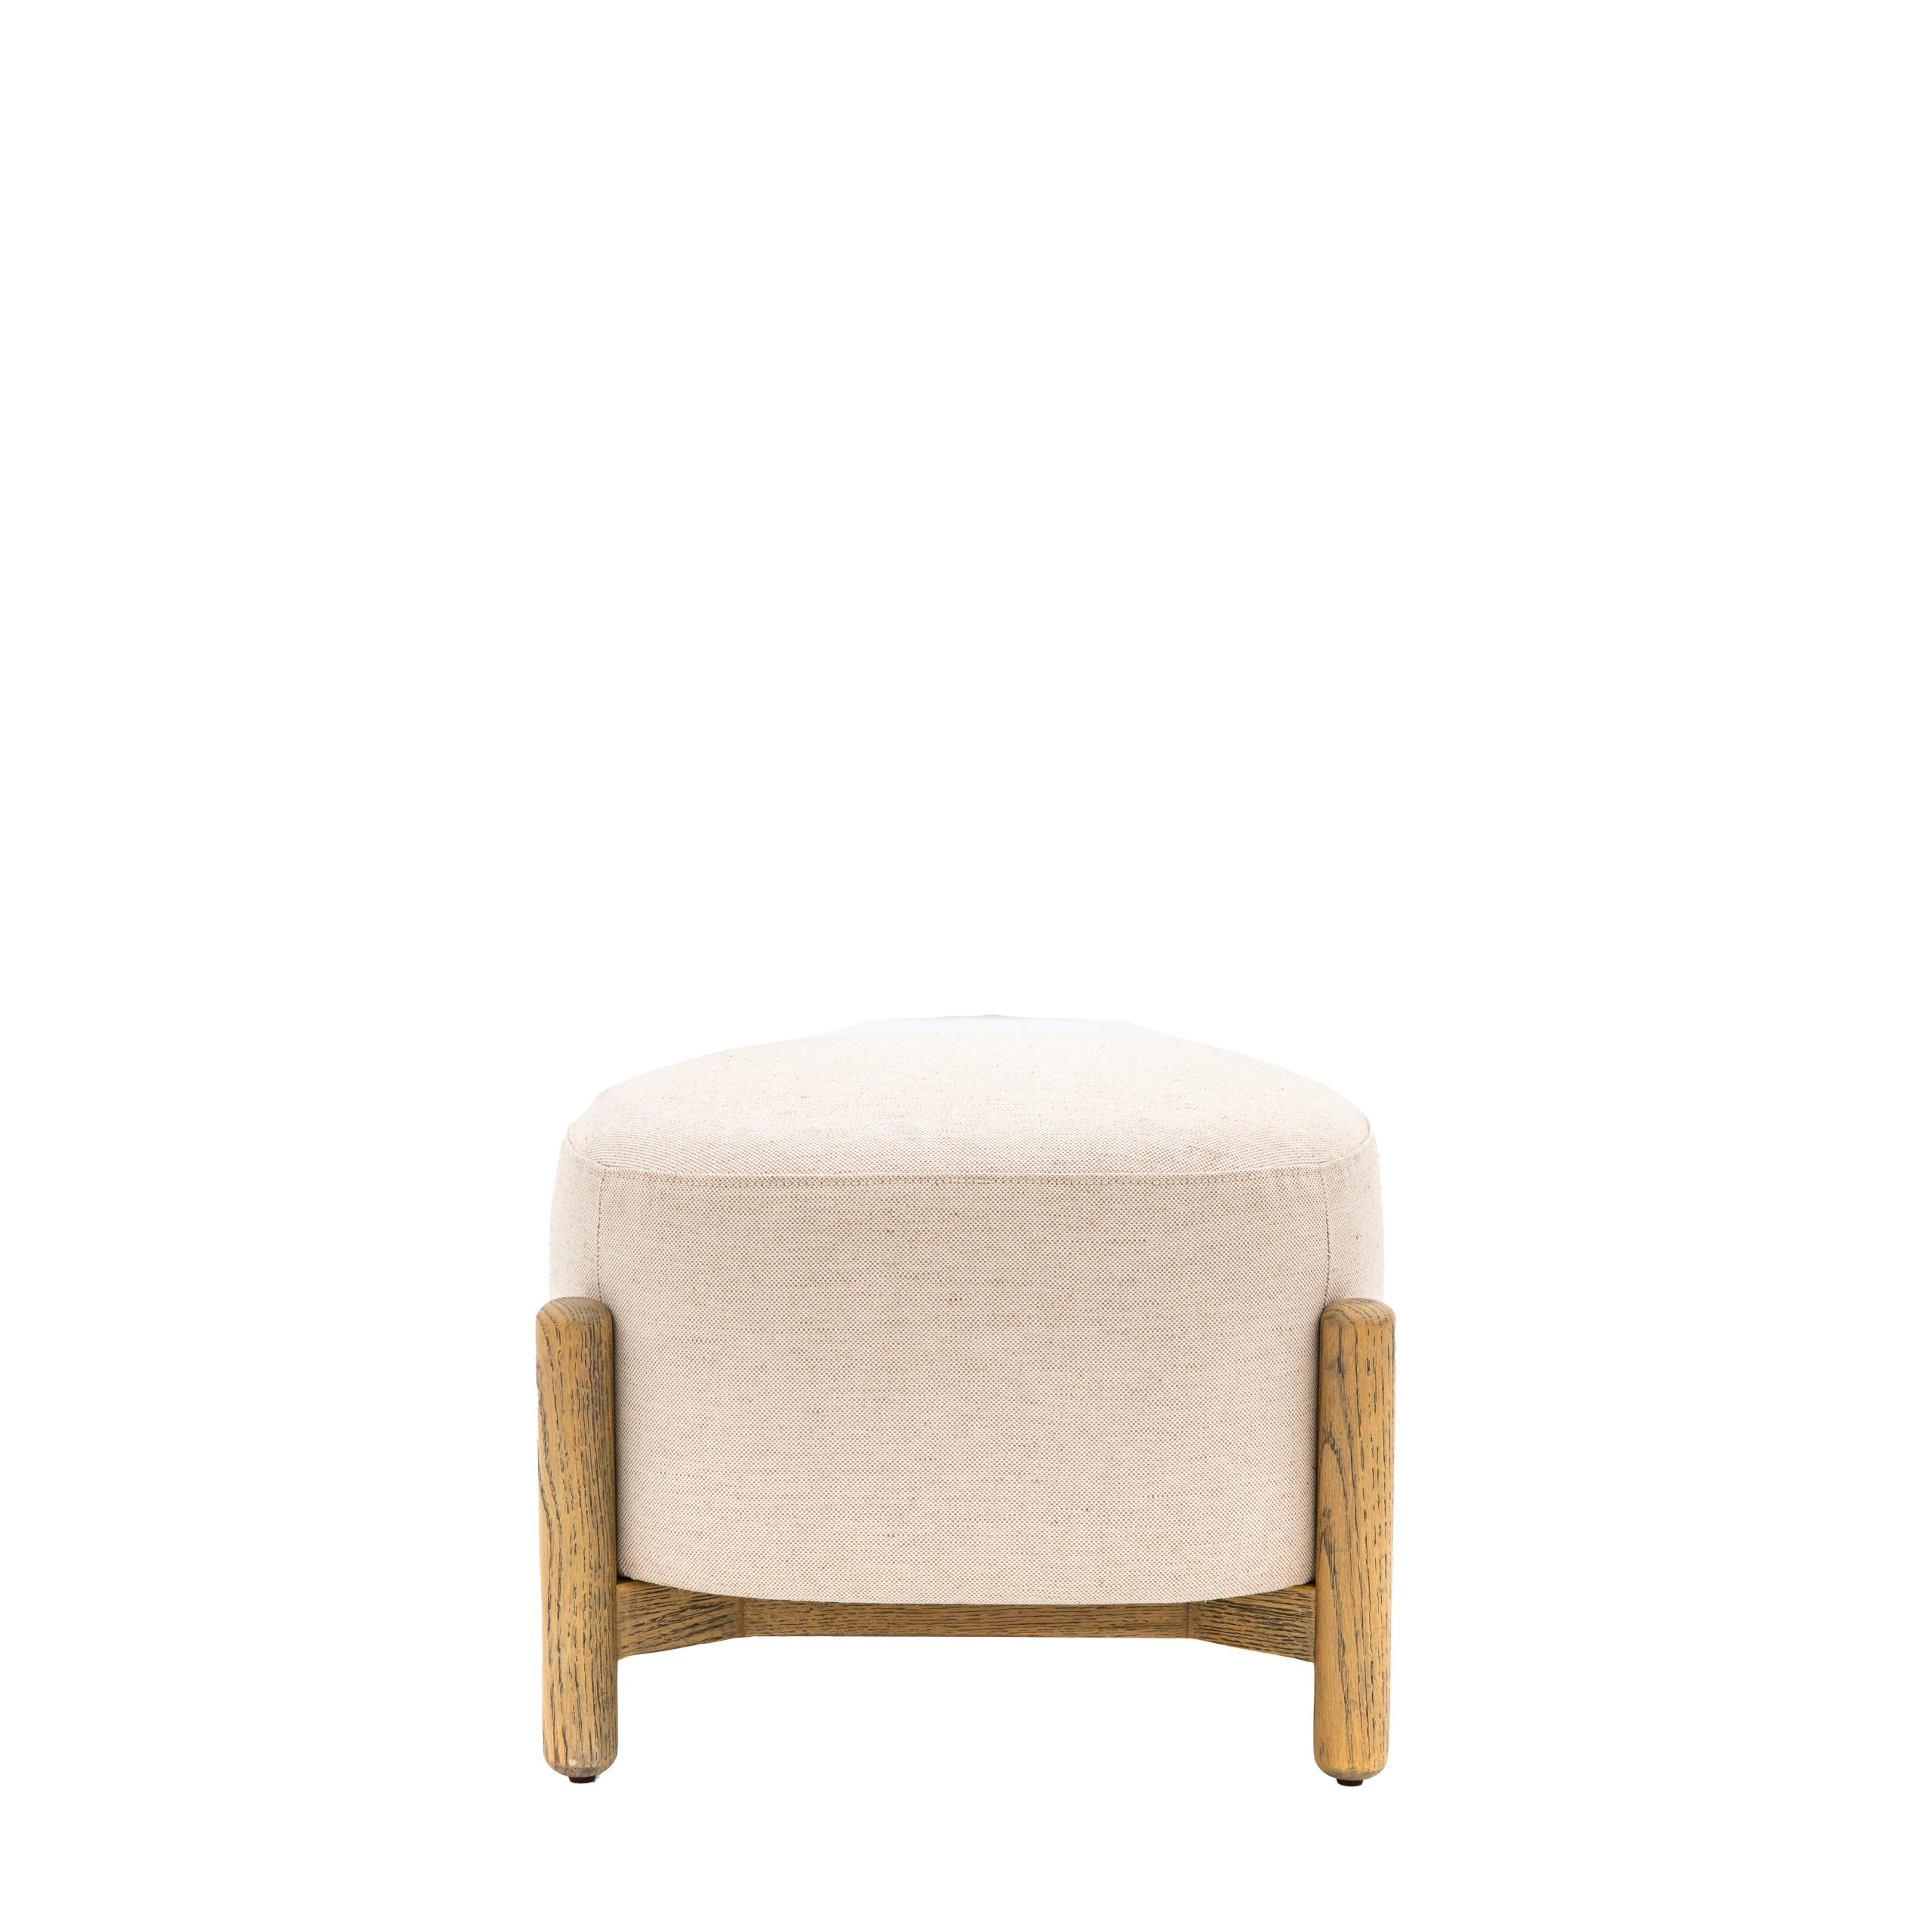 Gallery Direct Tindon Footstool Natural